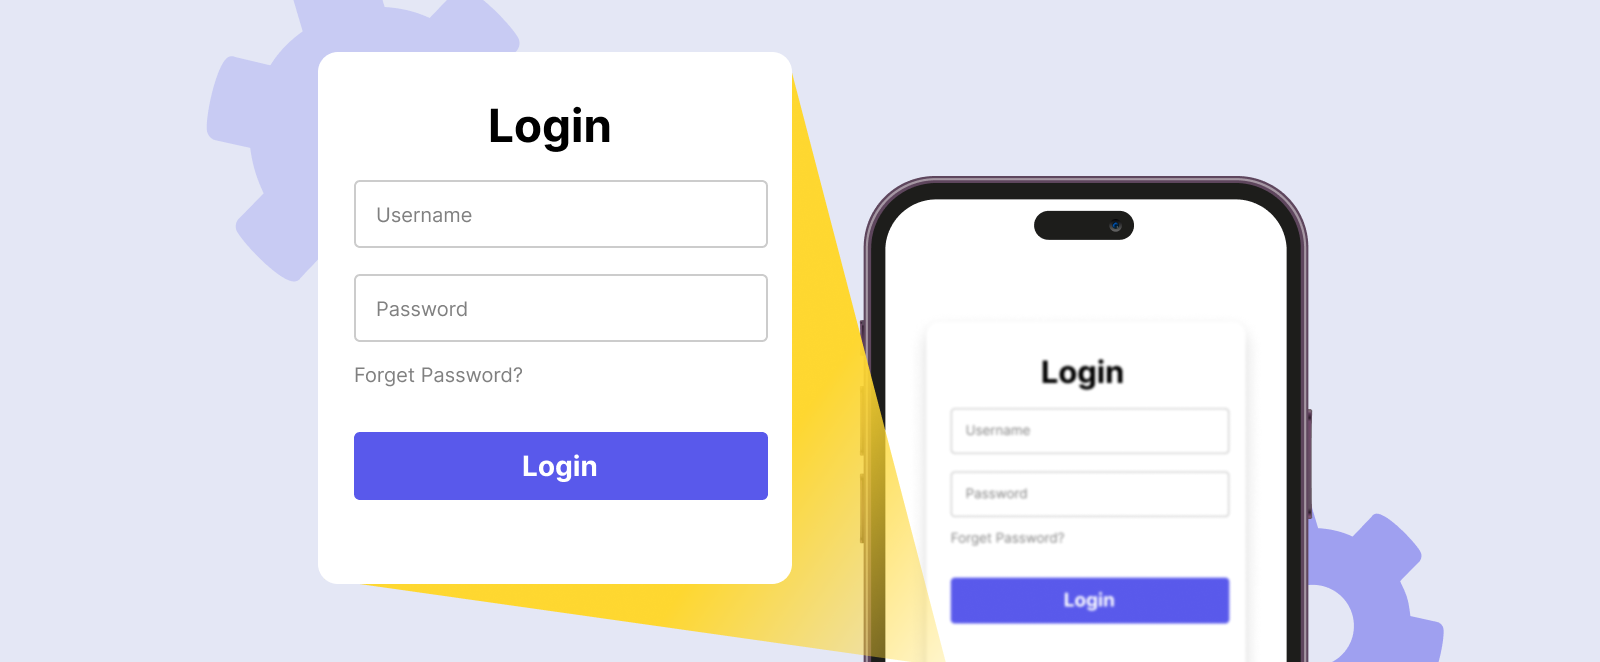 test cases for mobile Login page